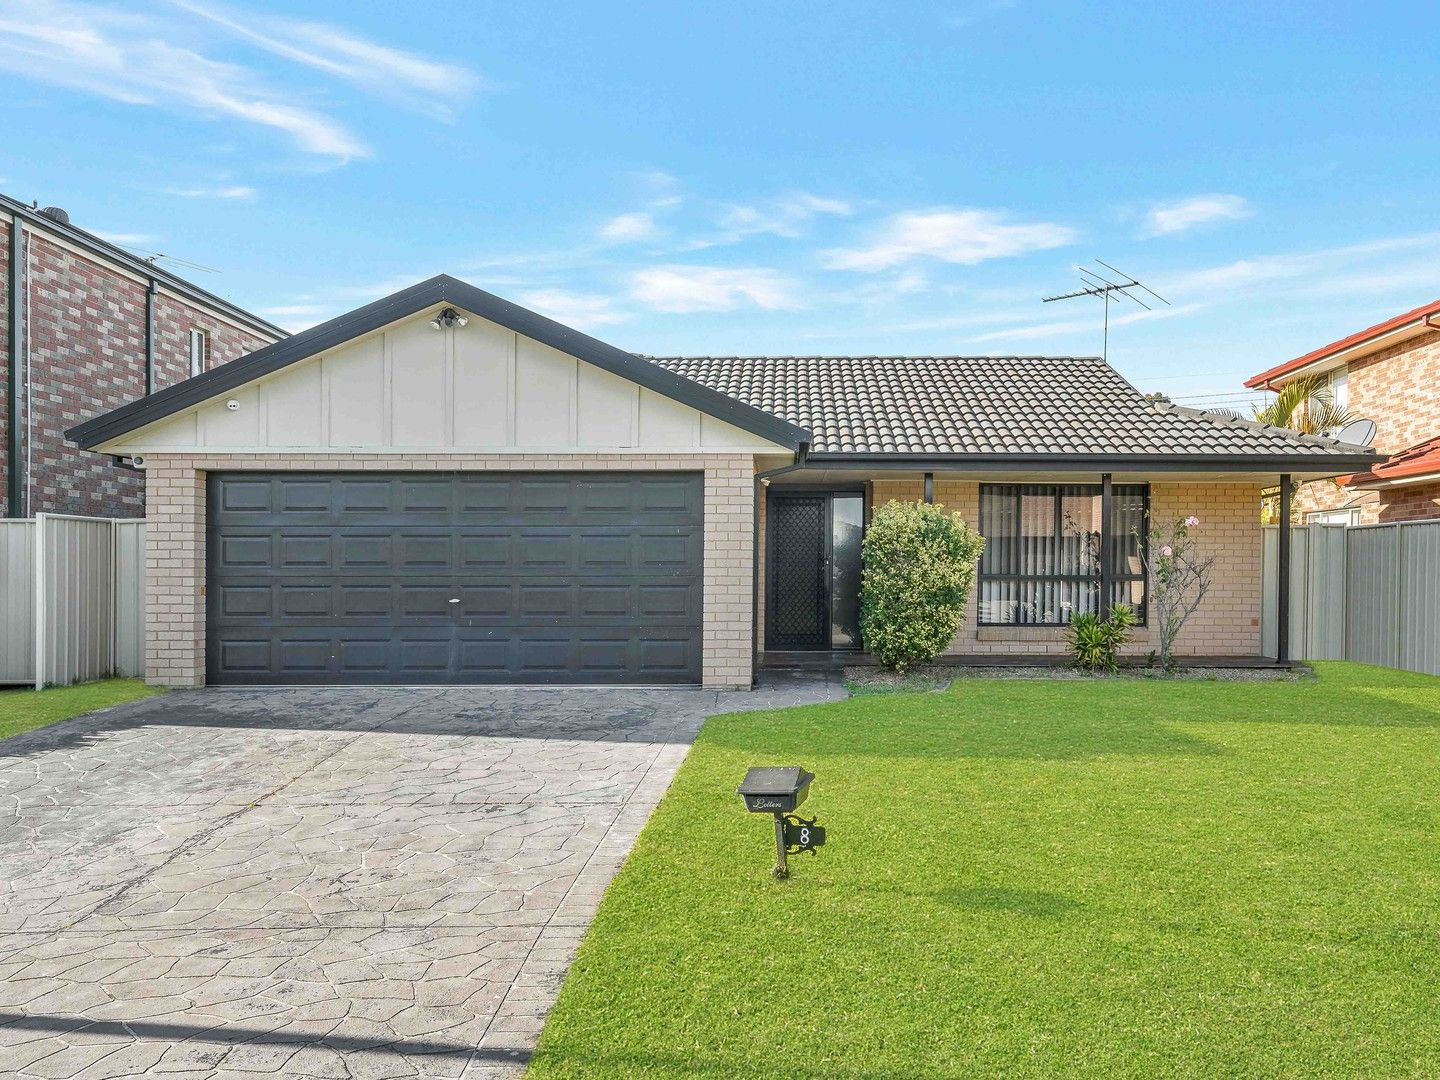 4 bedrooms House in 8 Sawtell Close HOXTON PARK NSW, 2171